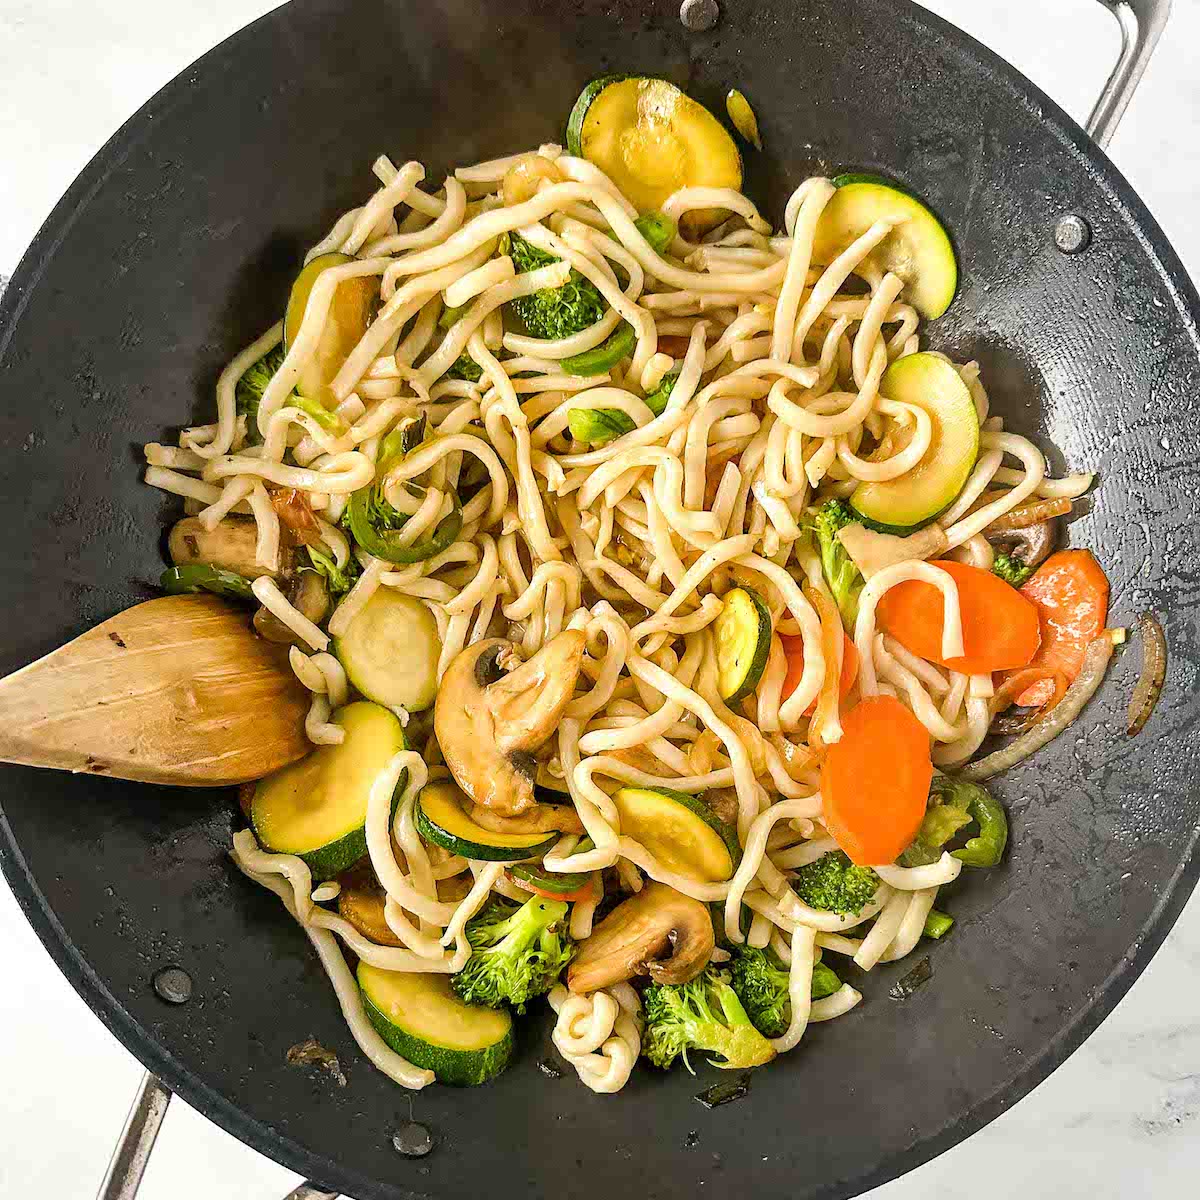 Udon noodles and mixed vegetables are stir-fried in a black wok with a wooden spoon.